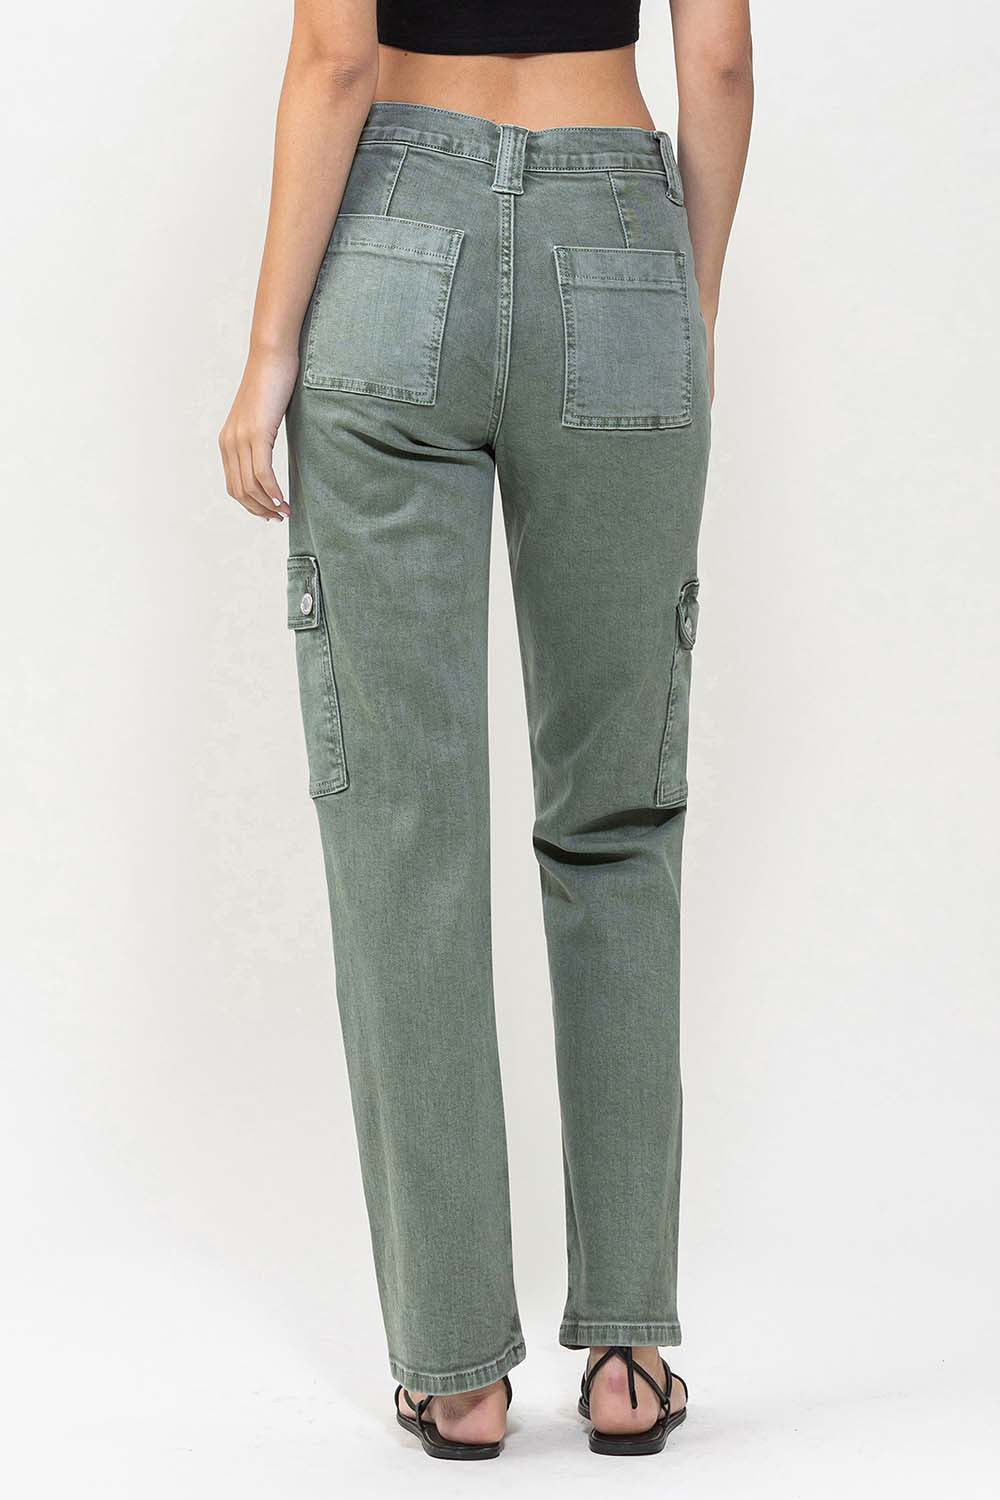 Dixie Cargo Jeans - KC Outfitter